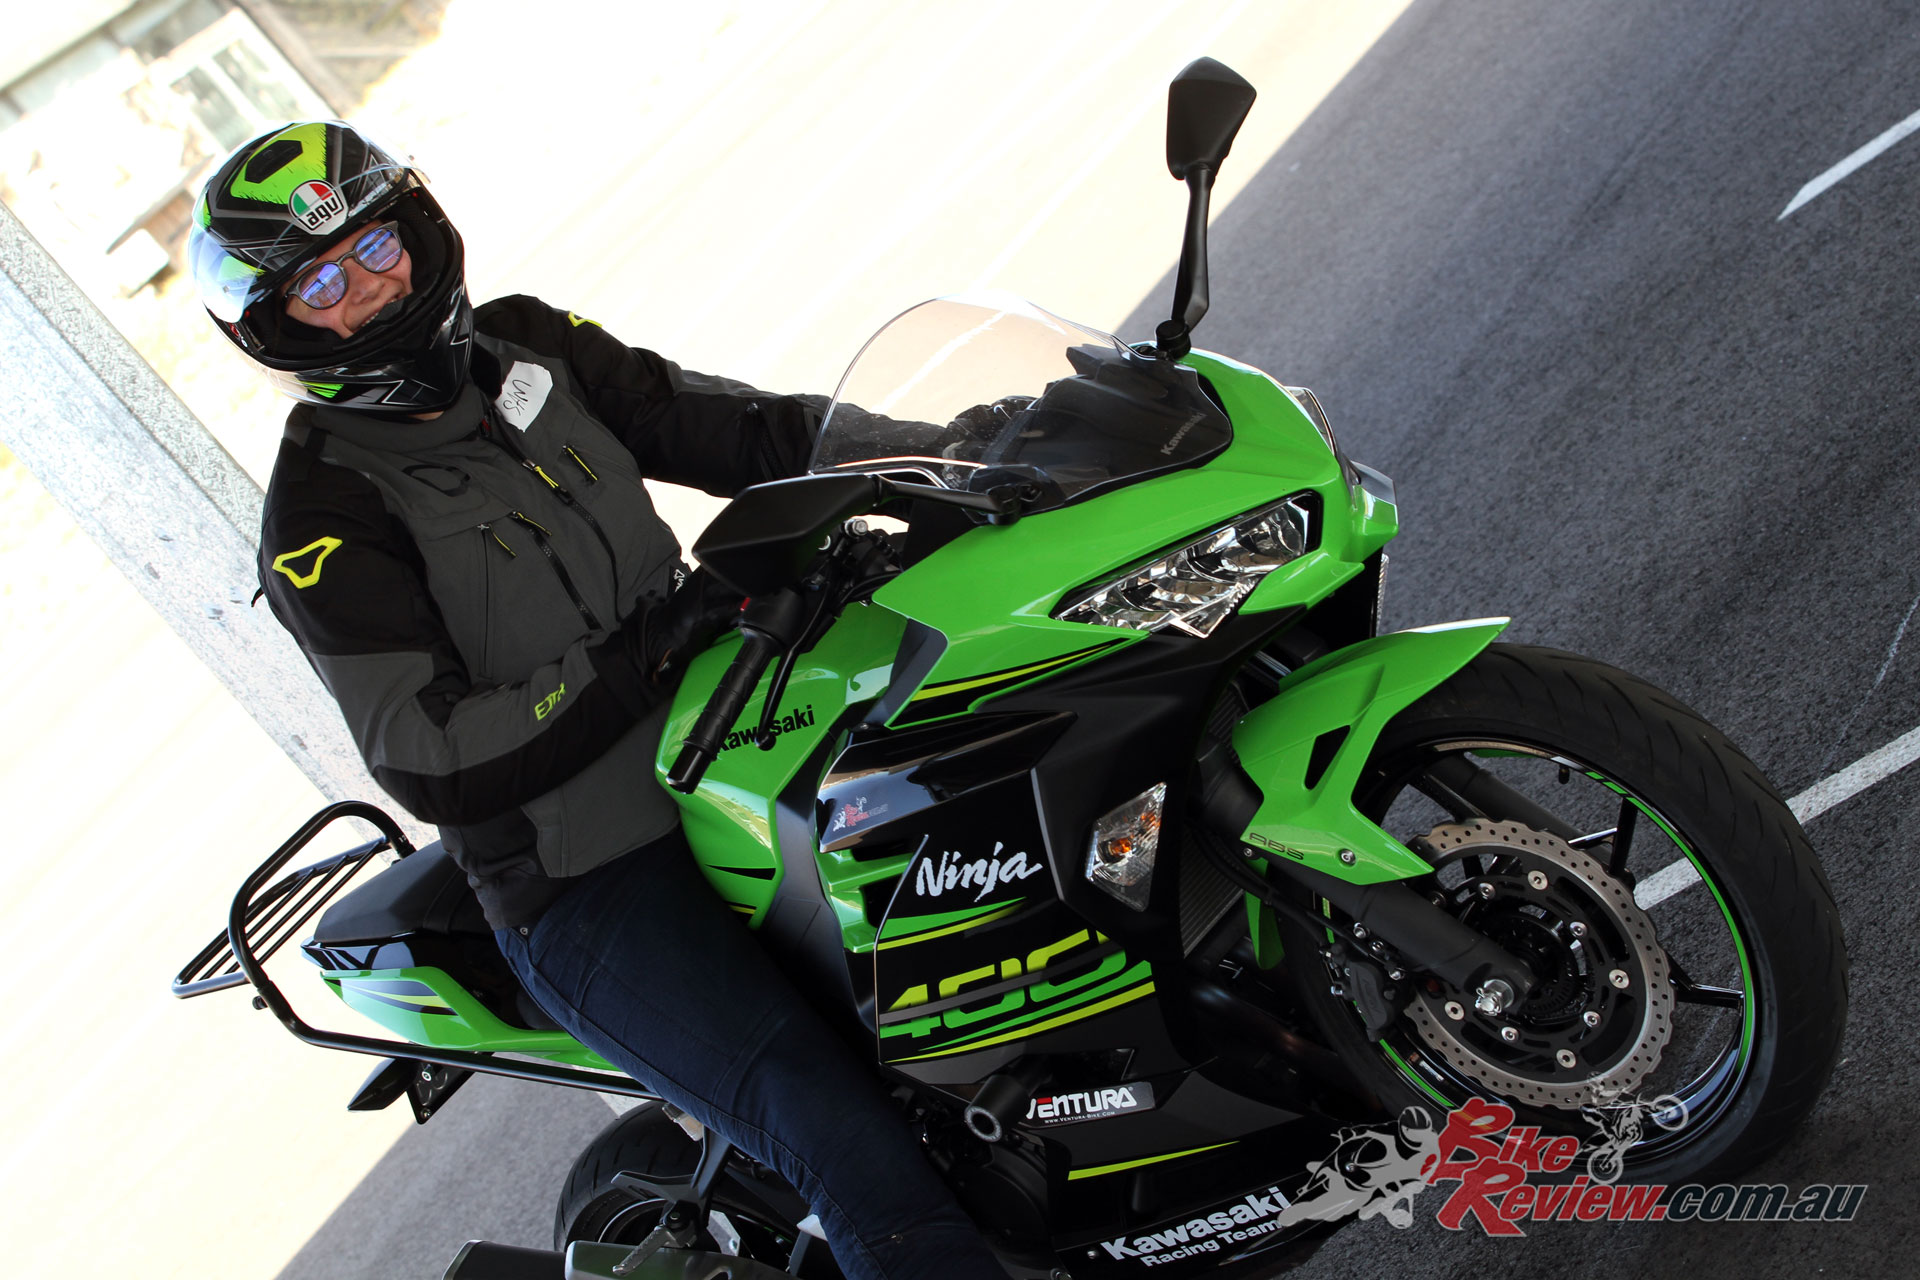 Samantha had a great time on the Ninja 400 at the Top Rider Level 1 Course